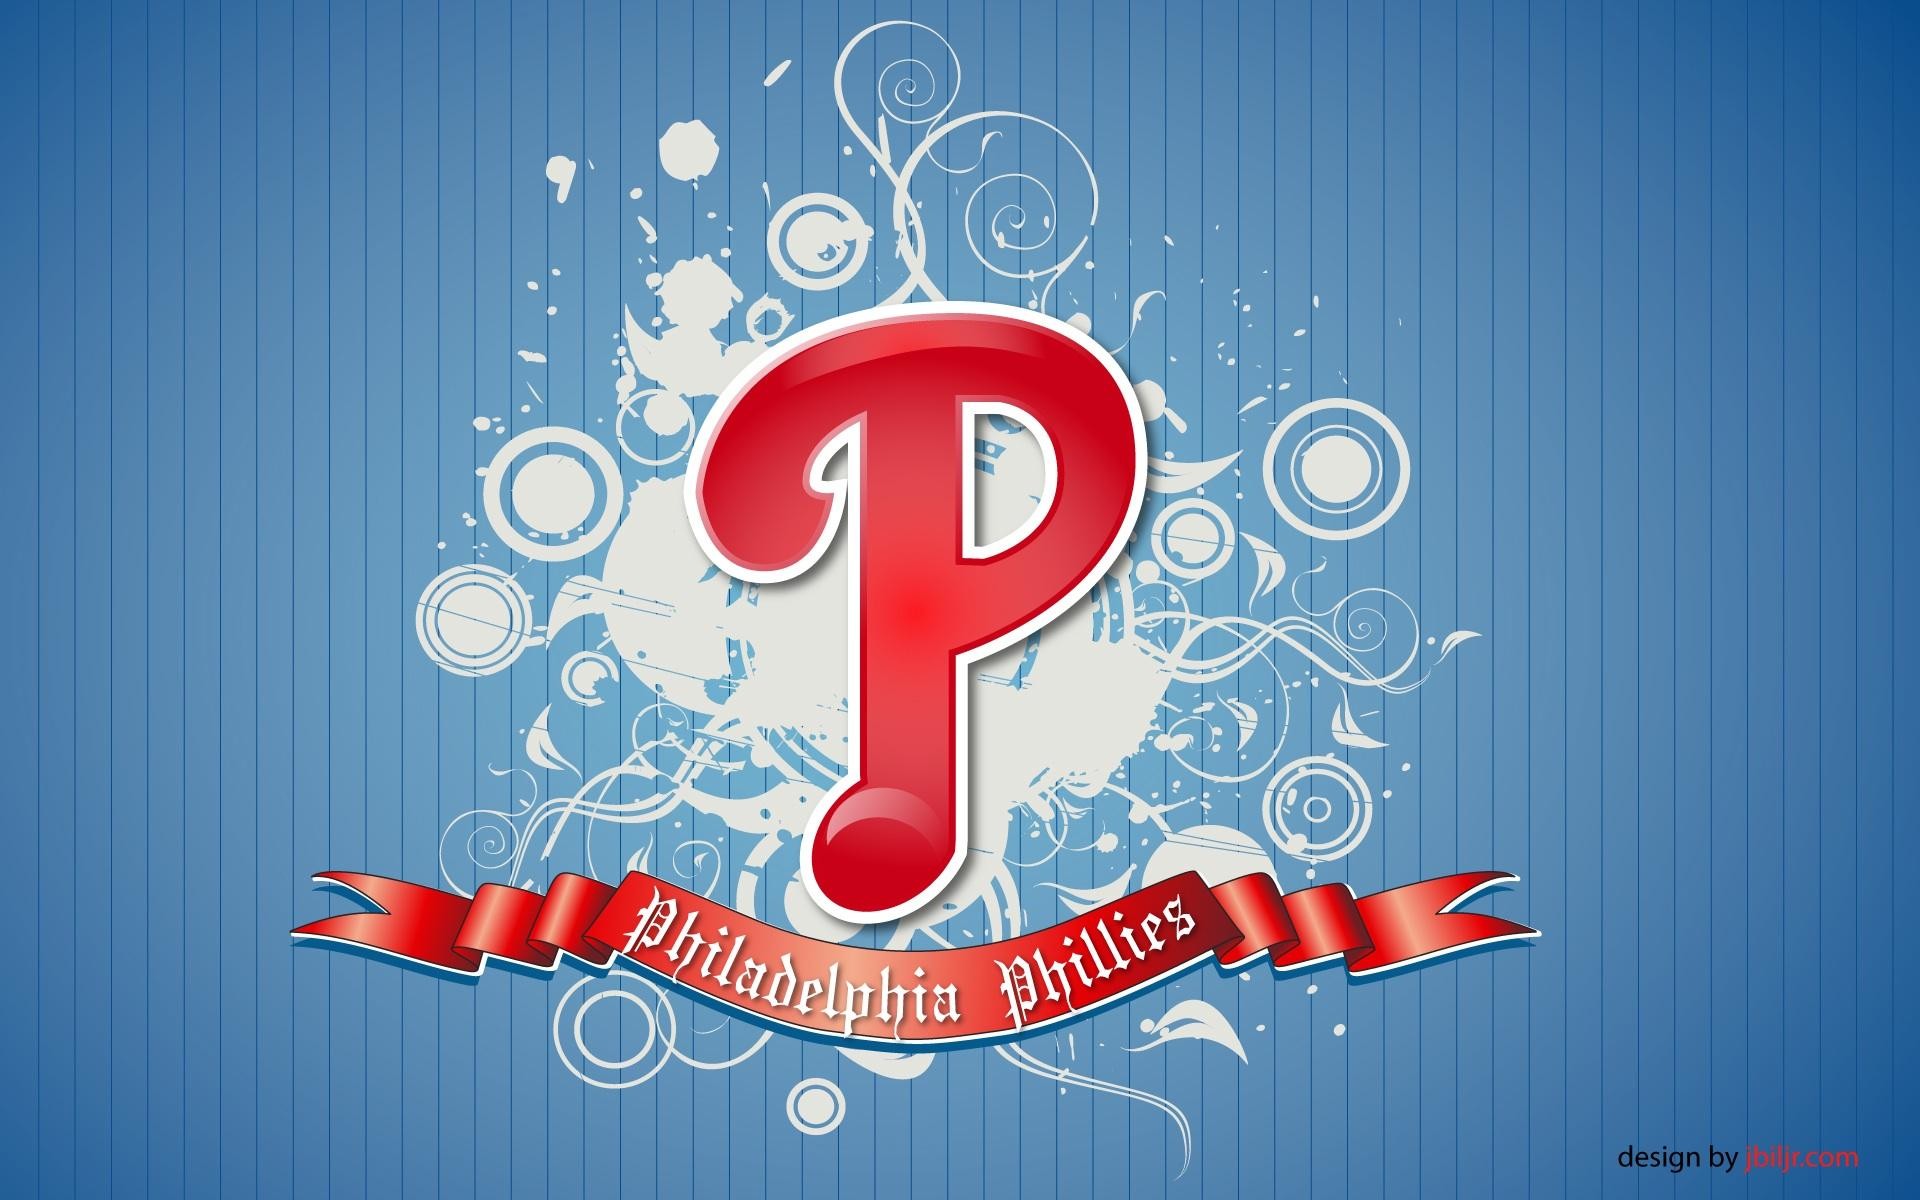 Cool Phillies Wallpapers  Wallpaper Cave